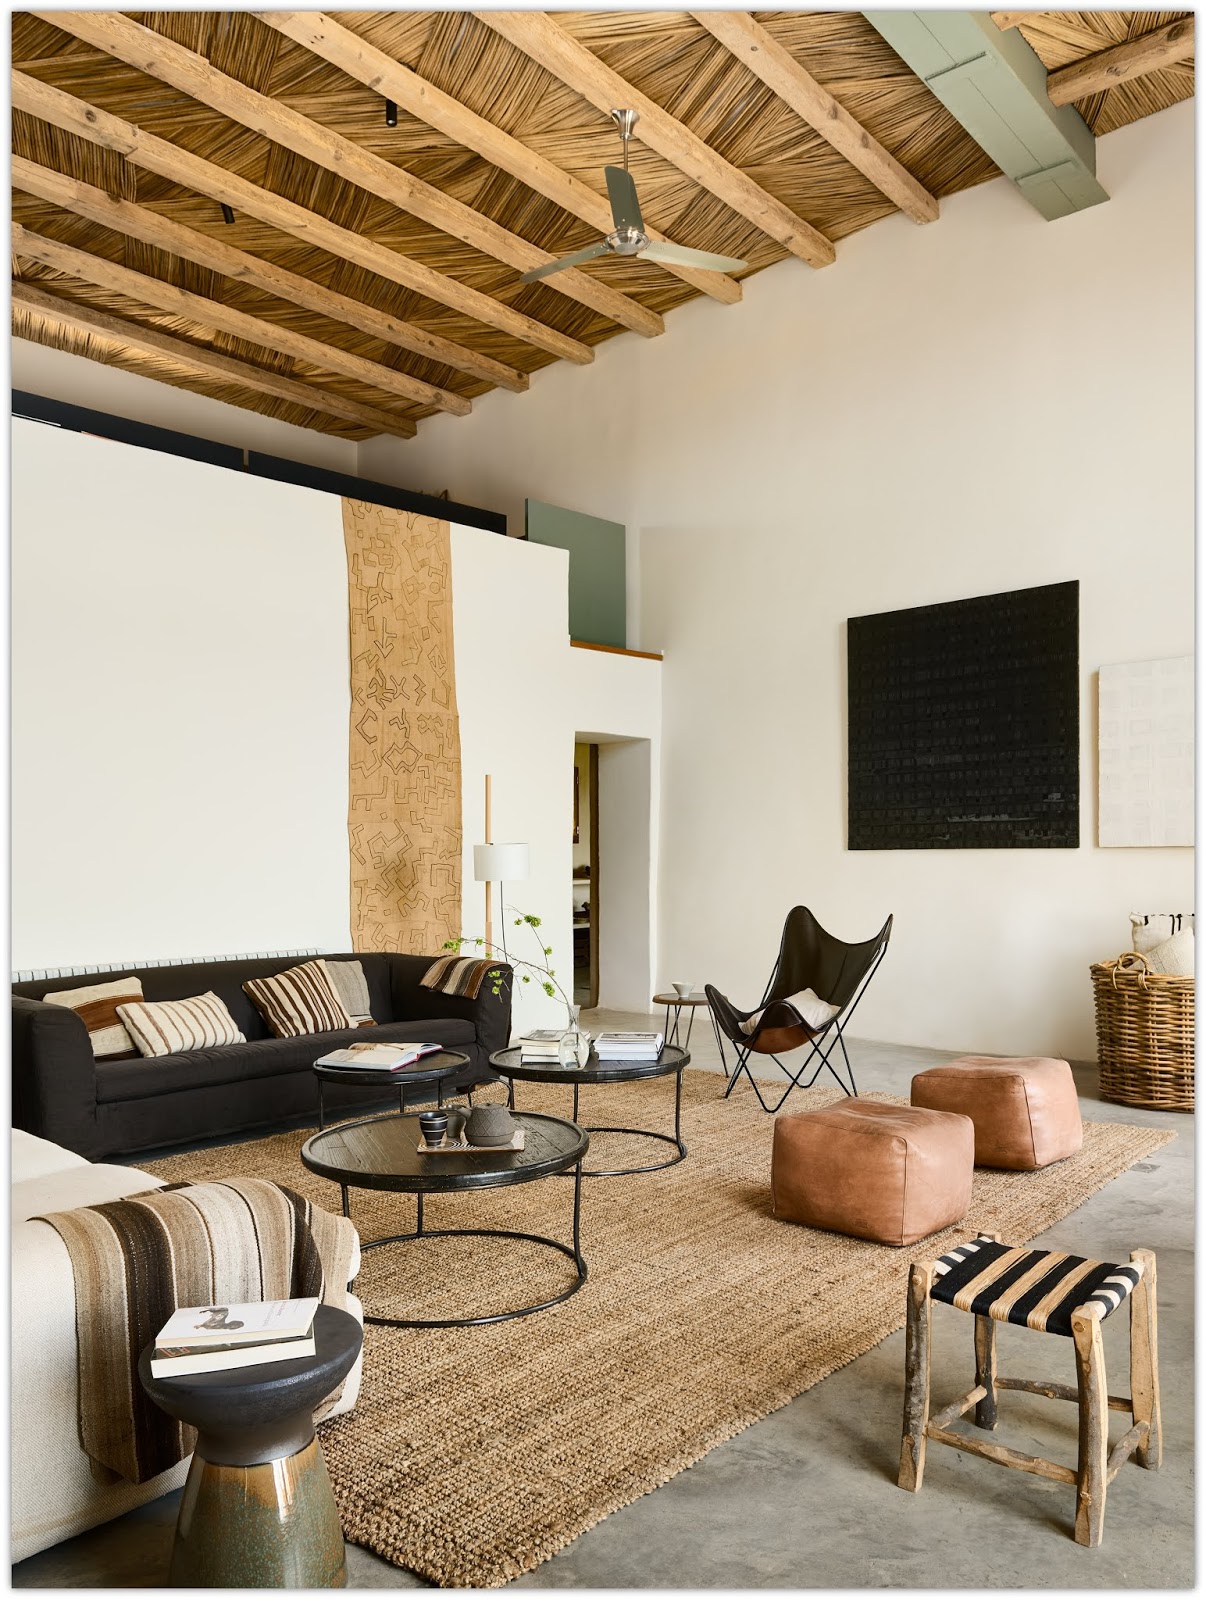 A Designer’s Modern Rustic Holiday Home in Spain